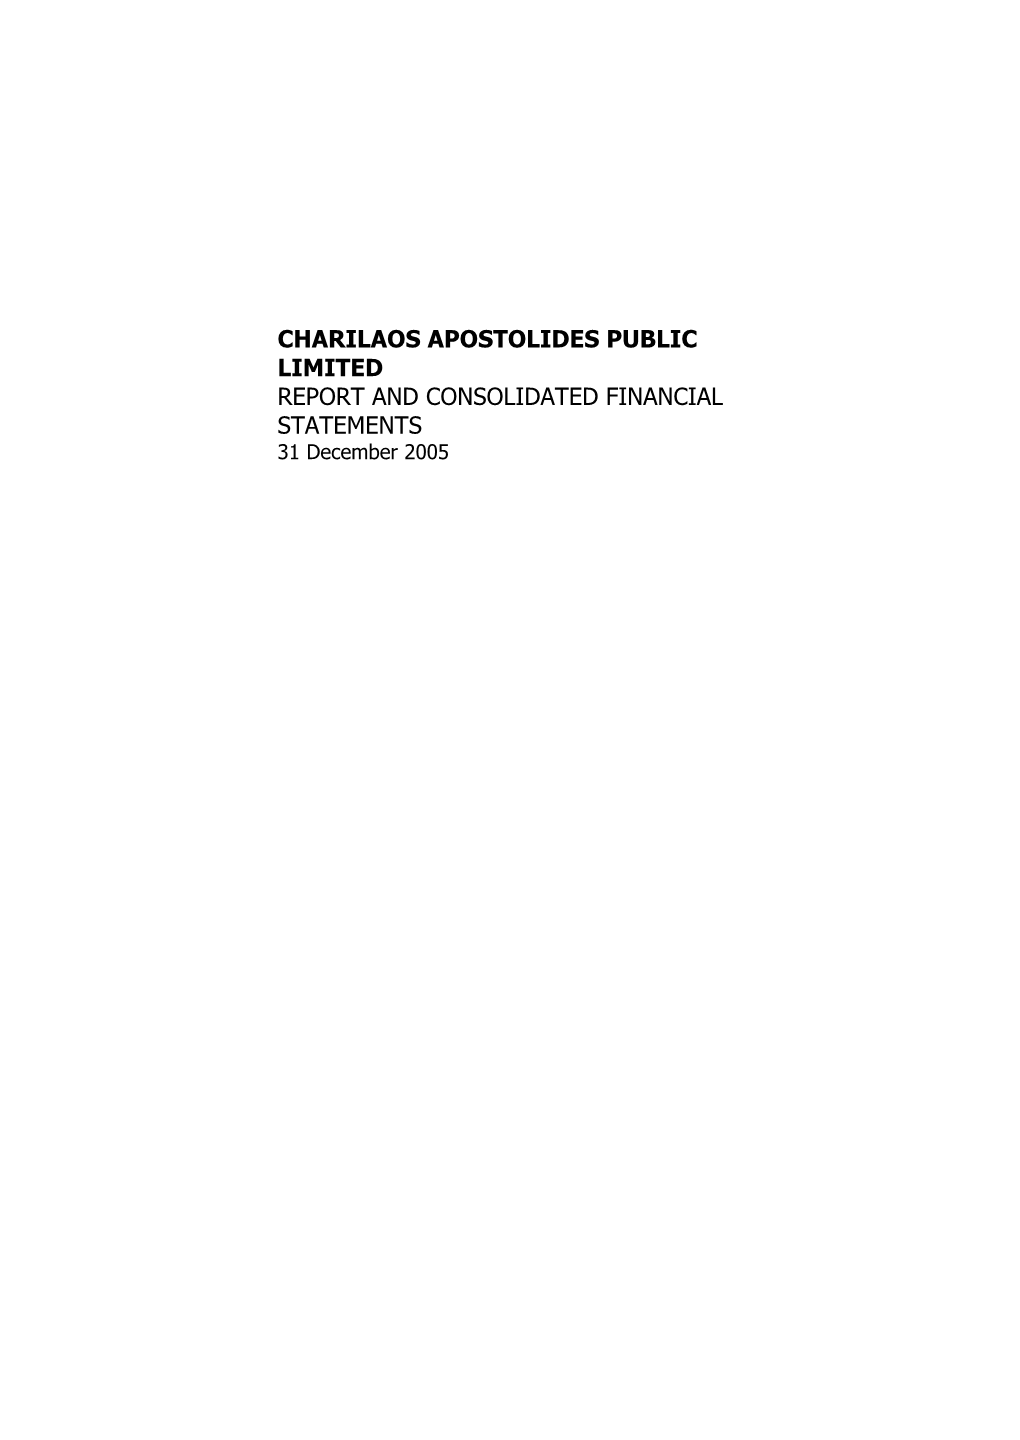 CHARILAOS APOSTOLIDES PUBLIC LIMITED REPORT and CONSOLIDATED FINANCIAL STATEMENTS 31 December 2005